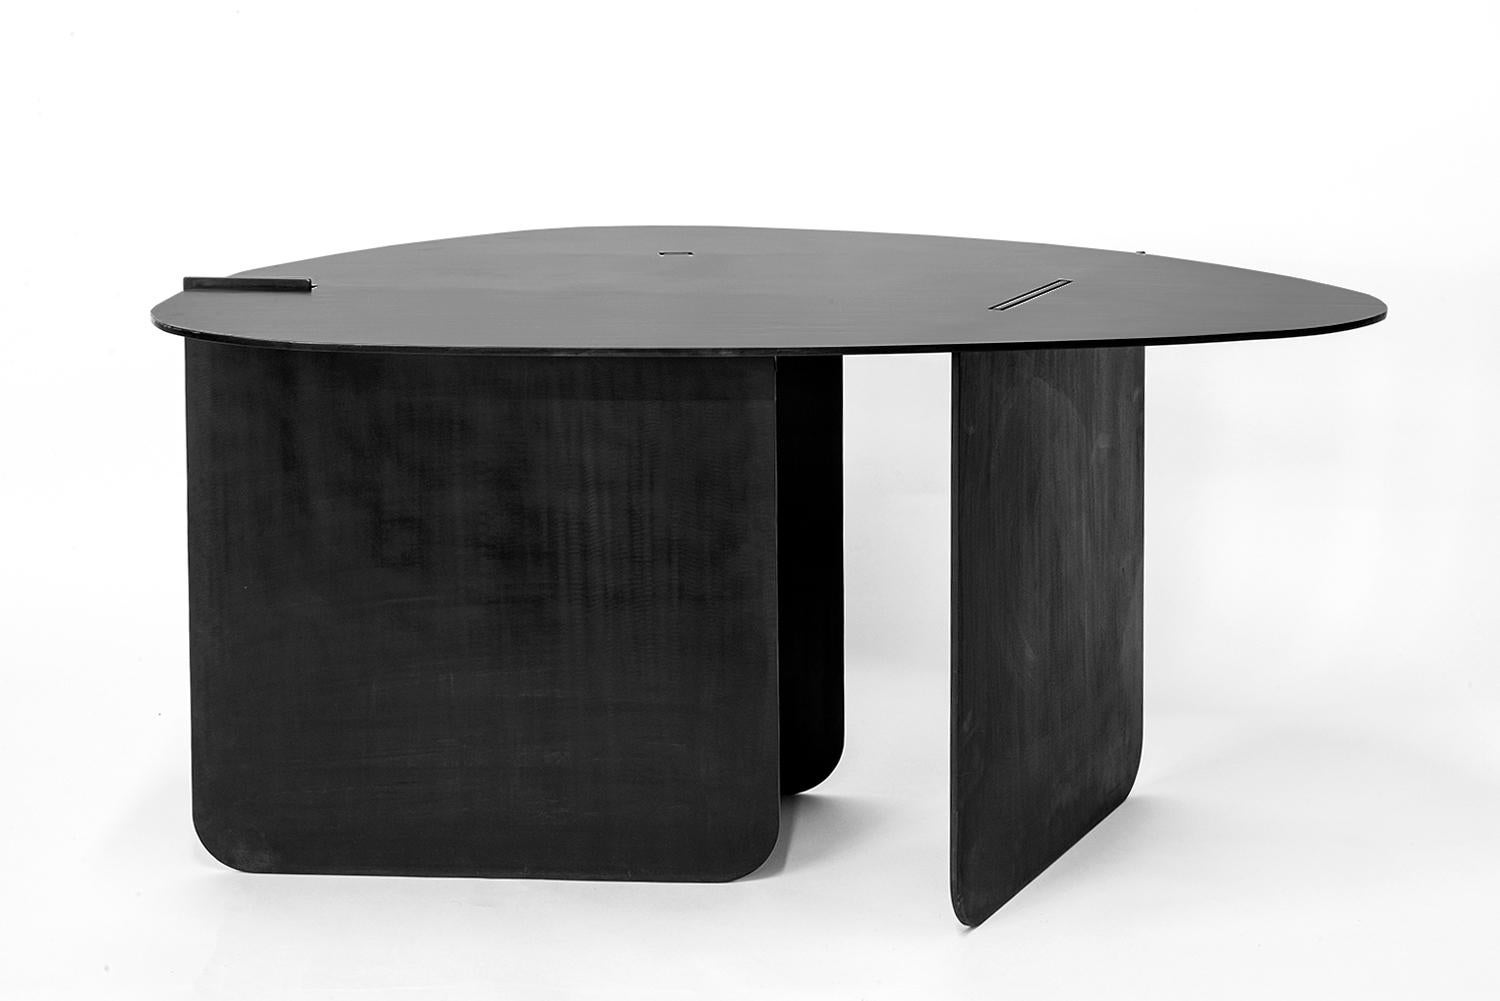 Table No. 15 - ALTO
J.M. Szymanski
d. 2022

This Noguchi-inspired coffee table is handcrafted in 3/8” thick steel, with a natural black patina and wax finish, to create an ulta-modern and inspired look. 

Custom sizes available. Made in the